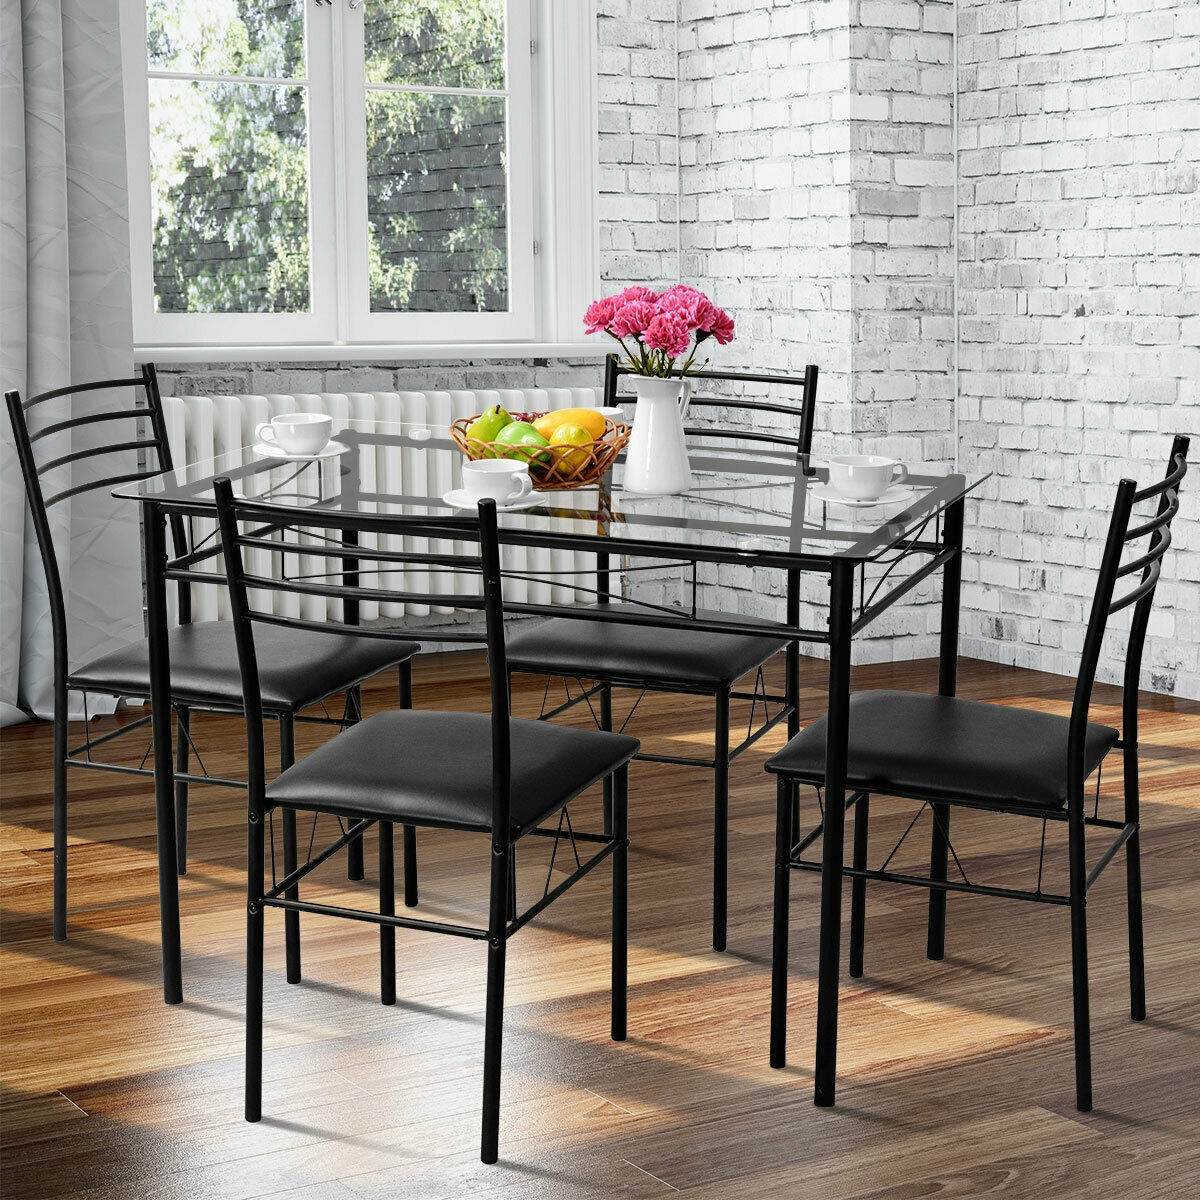 5 Pcs Dining Glass Top Table And 4 Upholstered Chairs